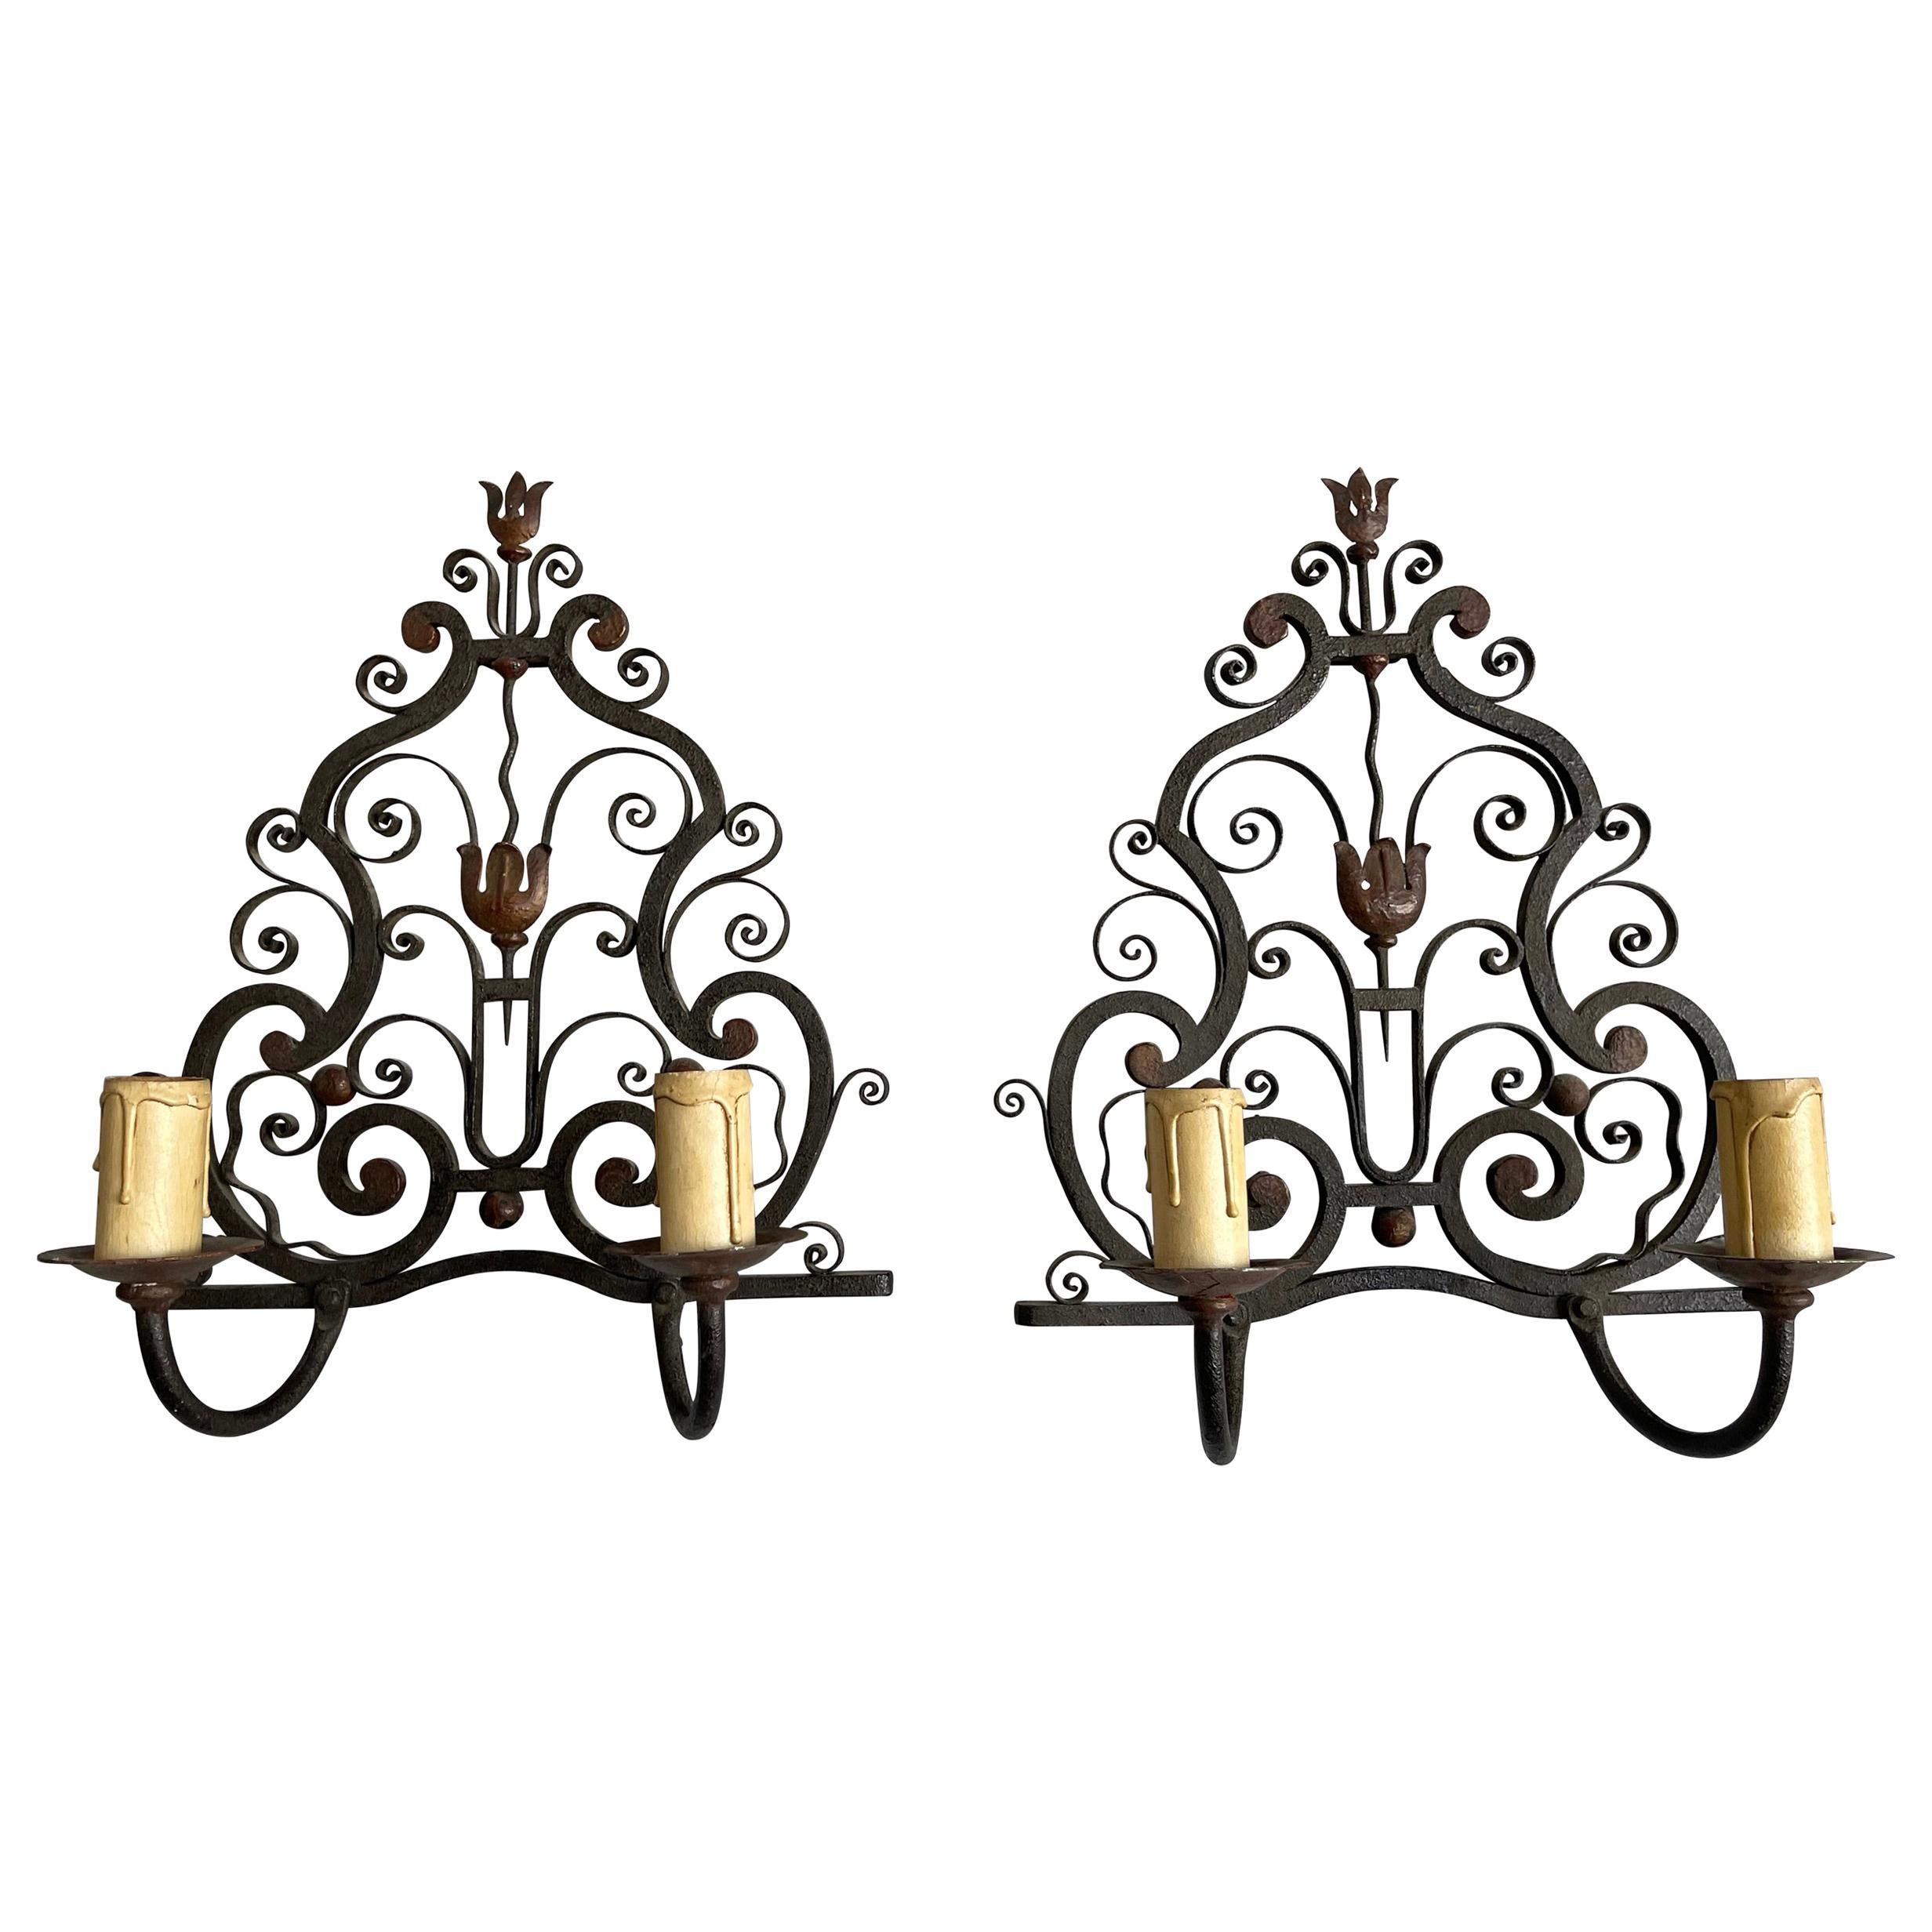 1930s Pair of Handmade Wrought Iron French Art Deco Poillerat Style Wall Sconces